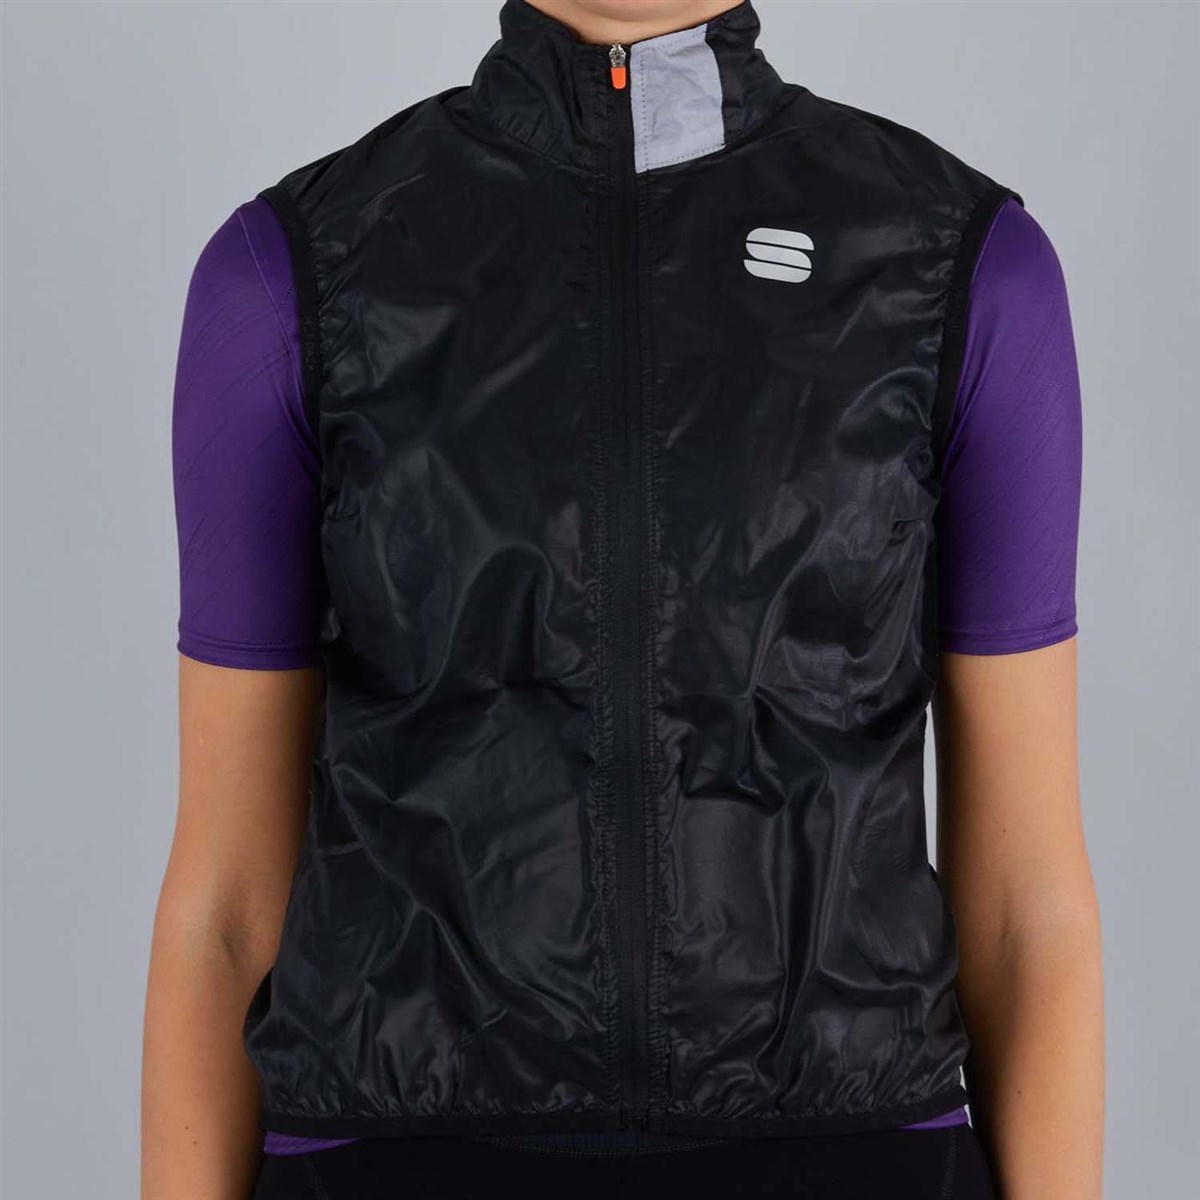 Sportful Hot Pack Easylight Womens Cycling Vest product image